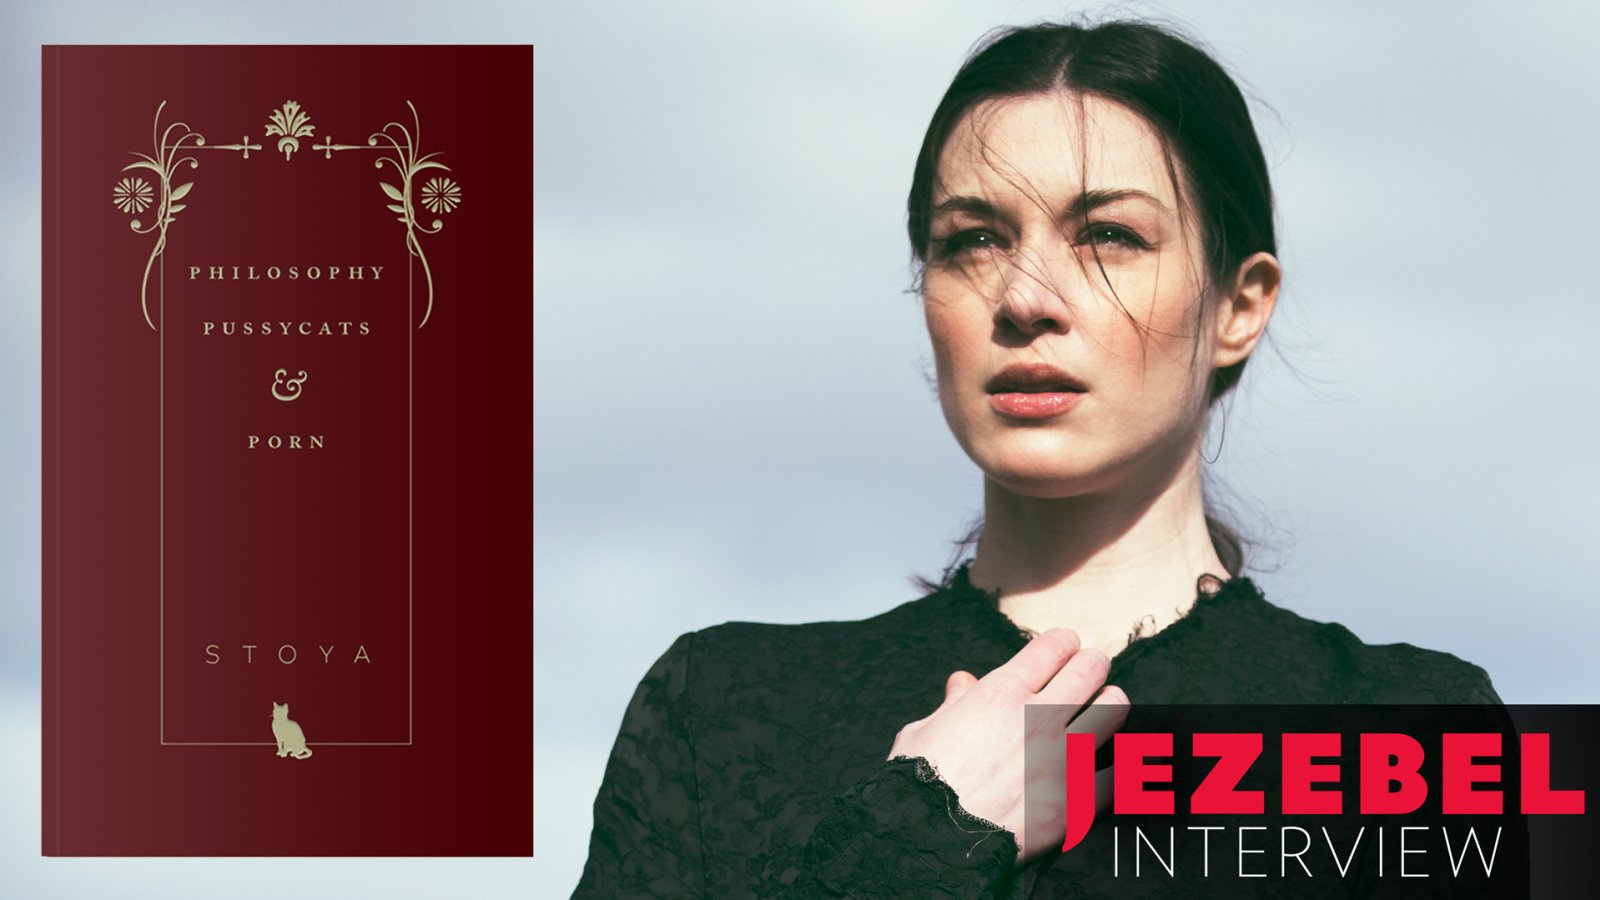 Stoya: "I increasingly believe there can be no feminism under capitalism."